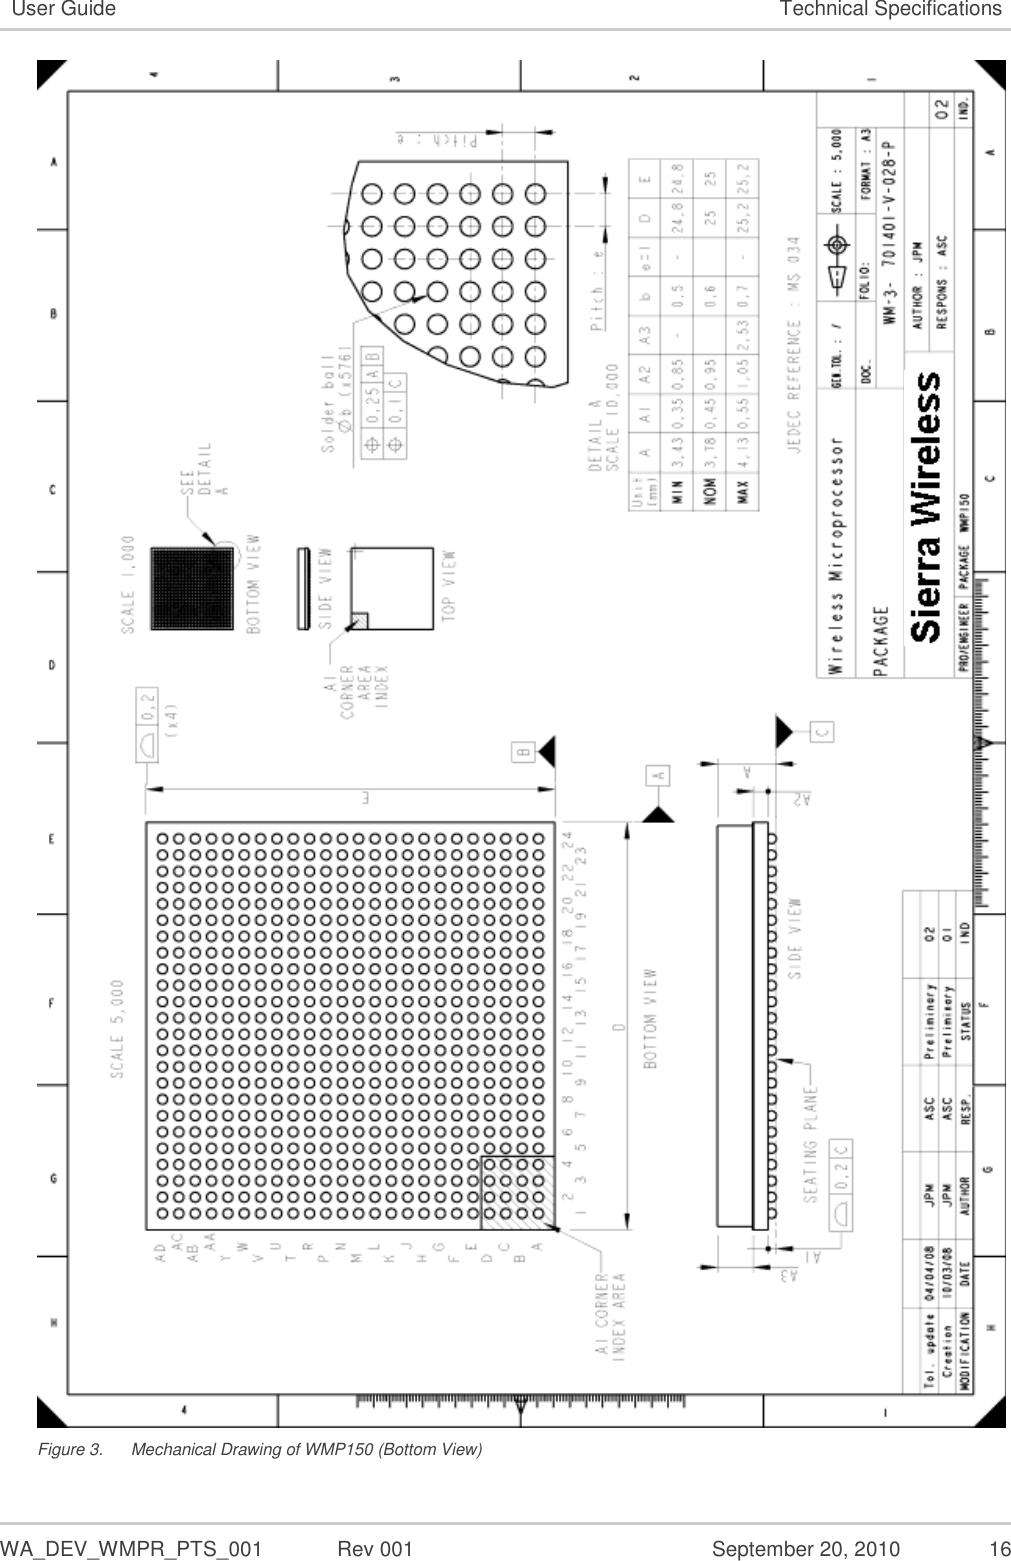   WA_DEV_WMPR_PTS_001  Rev 001  September 20, 2010  16 User Guide Technical Specifications  Figure 3.  Mechanical Drawing of WMP150 (Bottom View) 